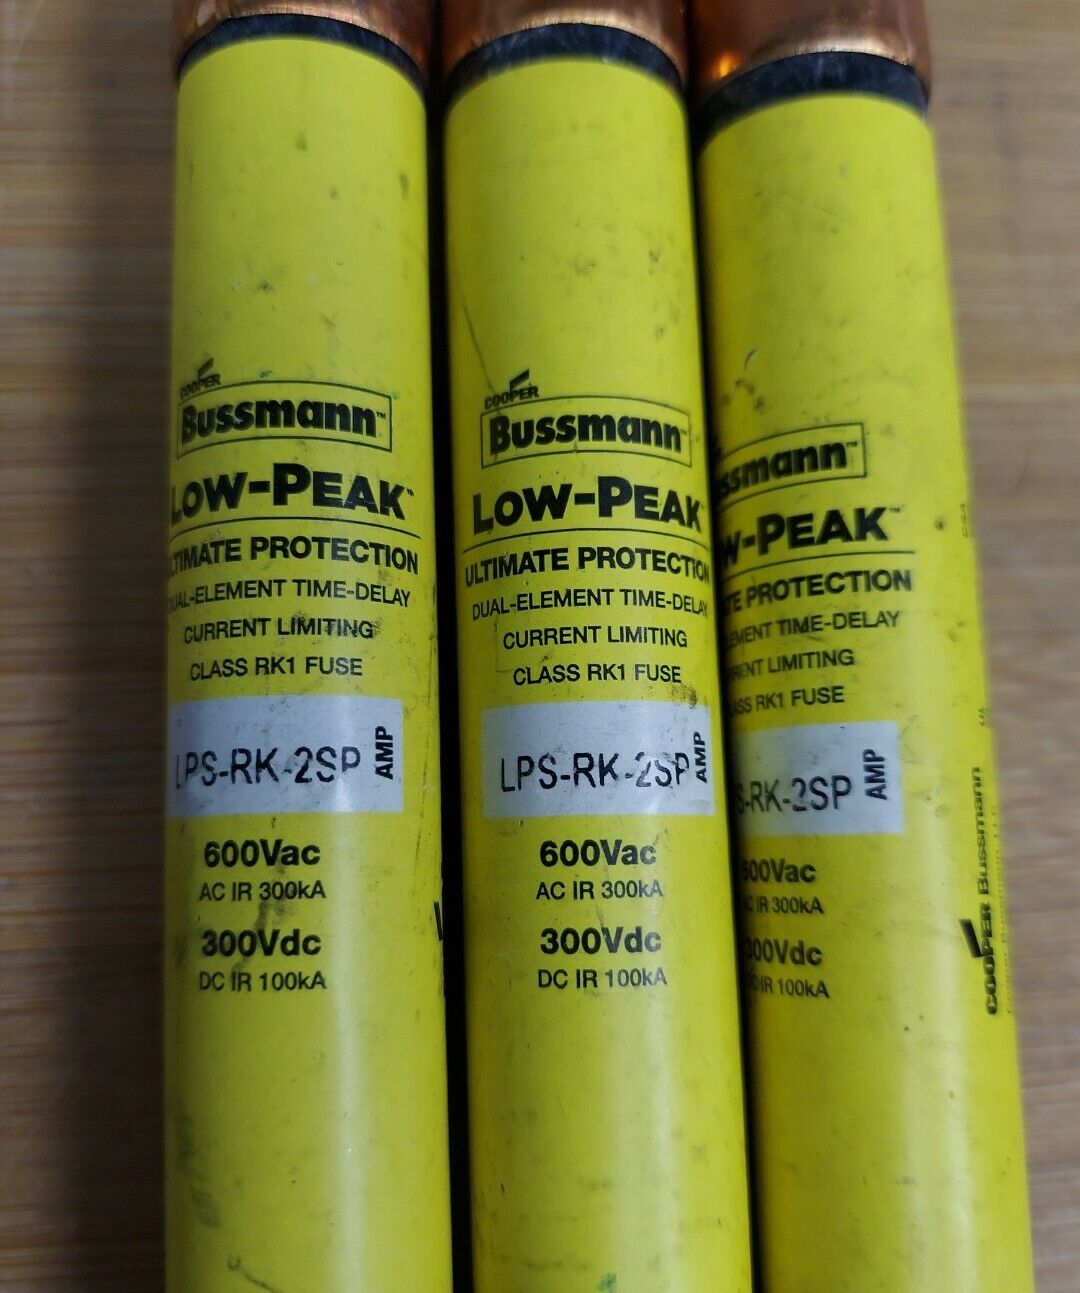 Bussmann LPS-RK-2SP 2A/AMP New Lot of 3 Fuses  (YE130)